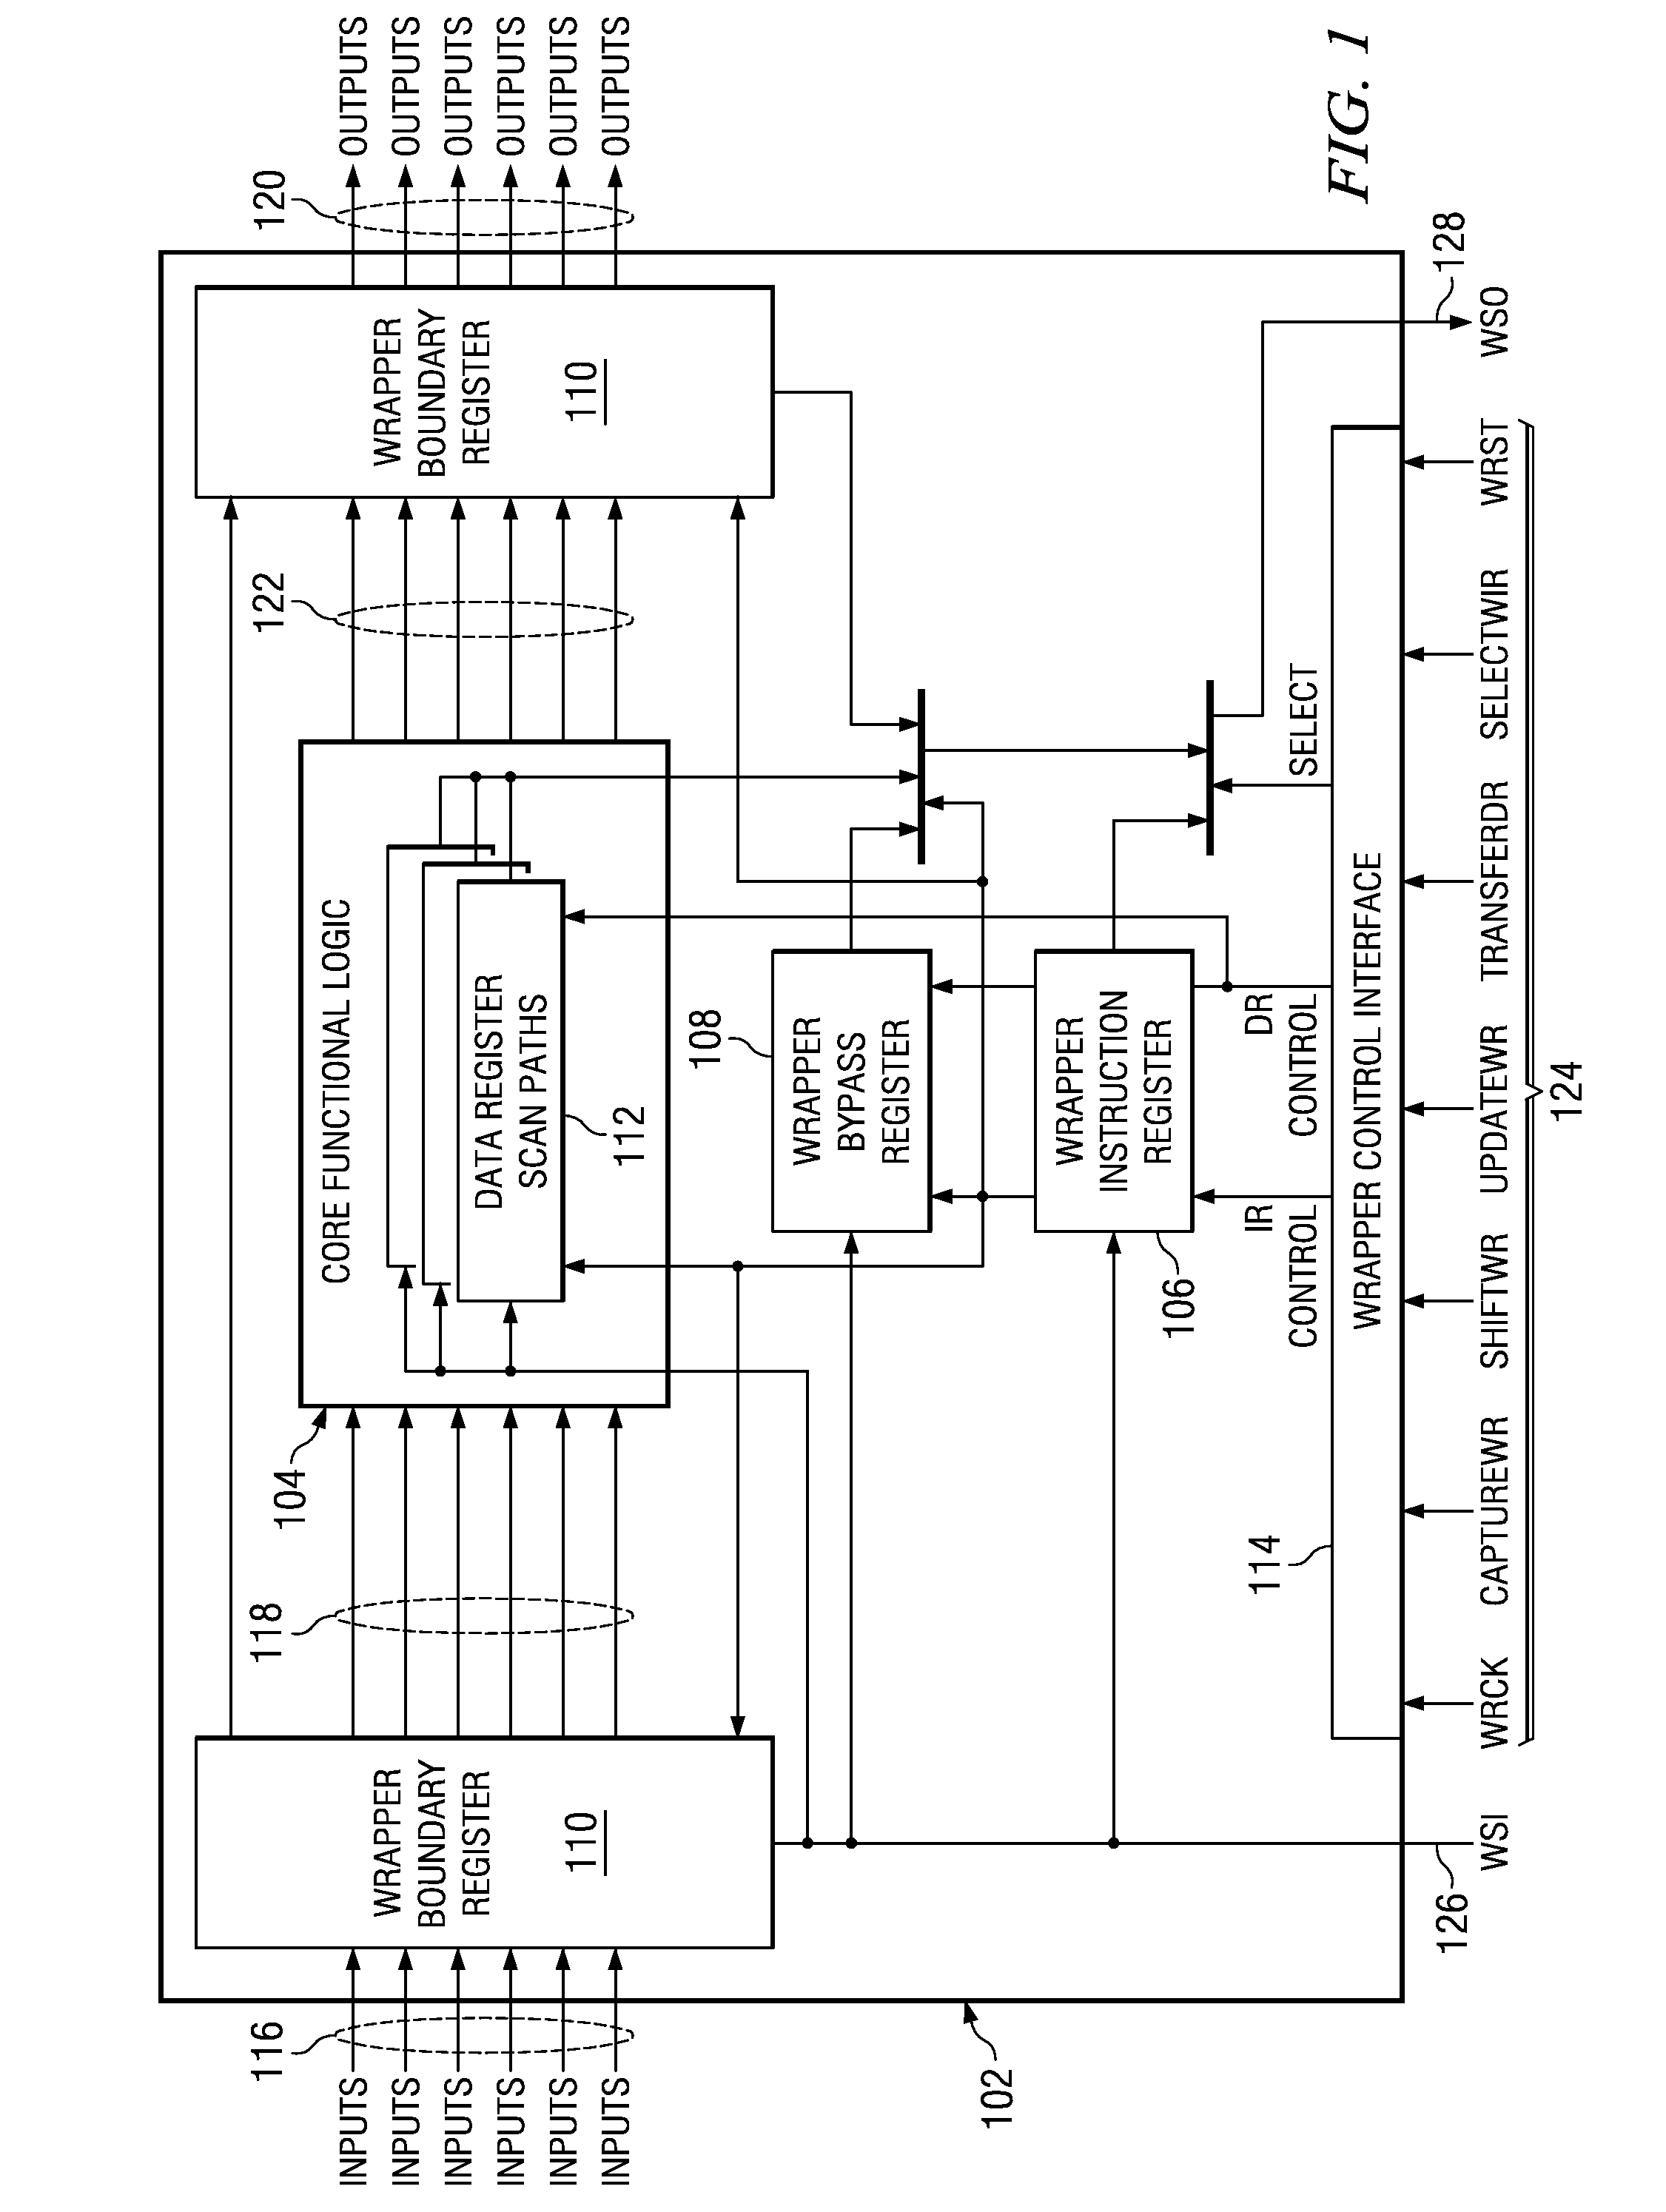 Device testing architecture, method, and system